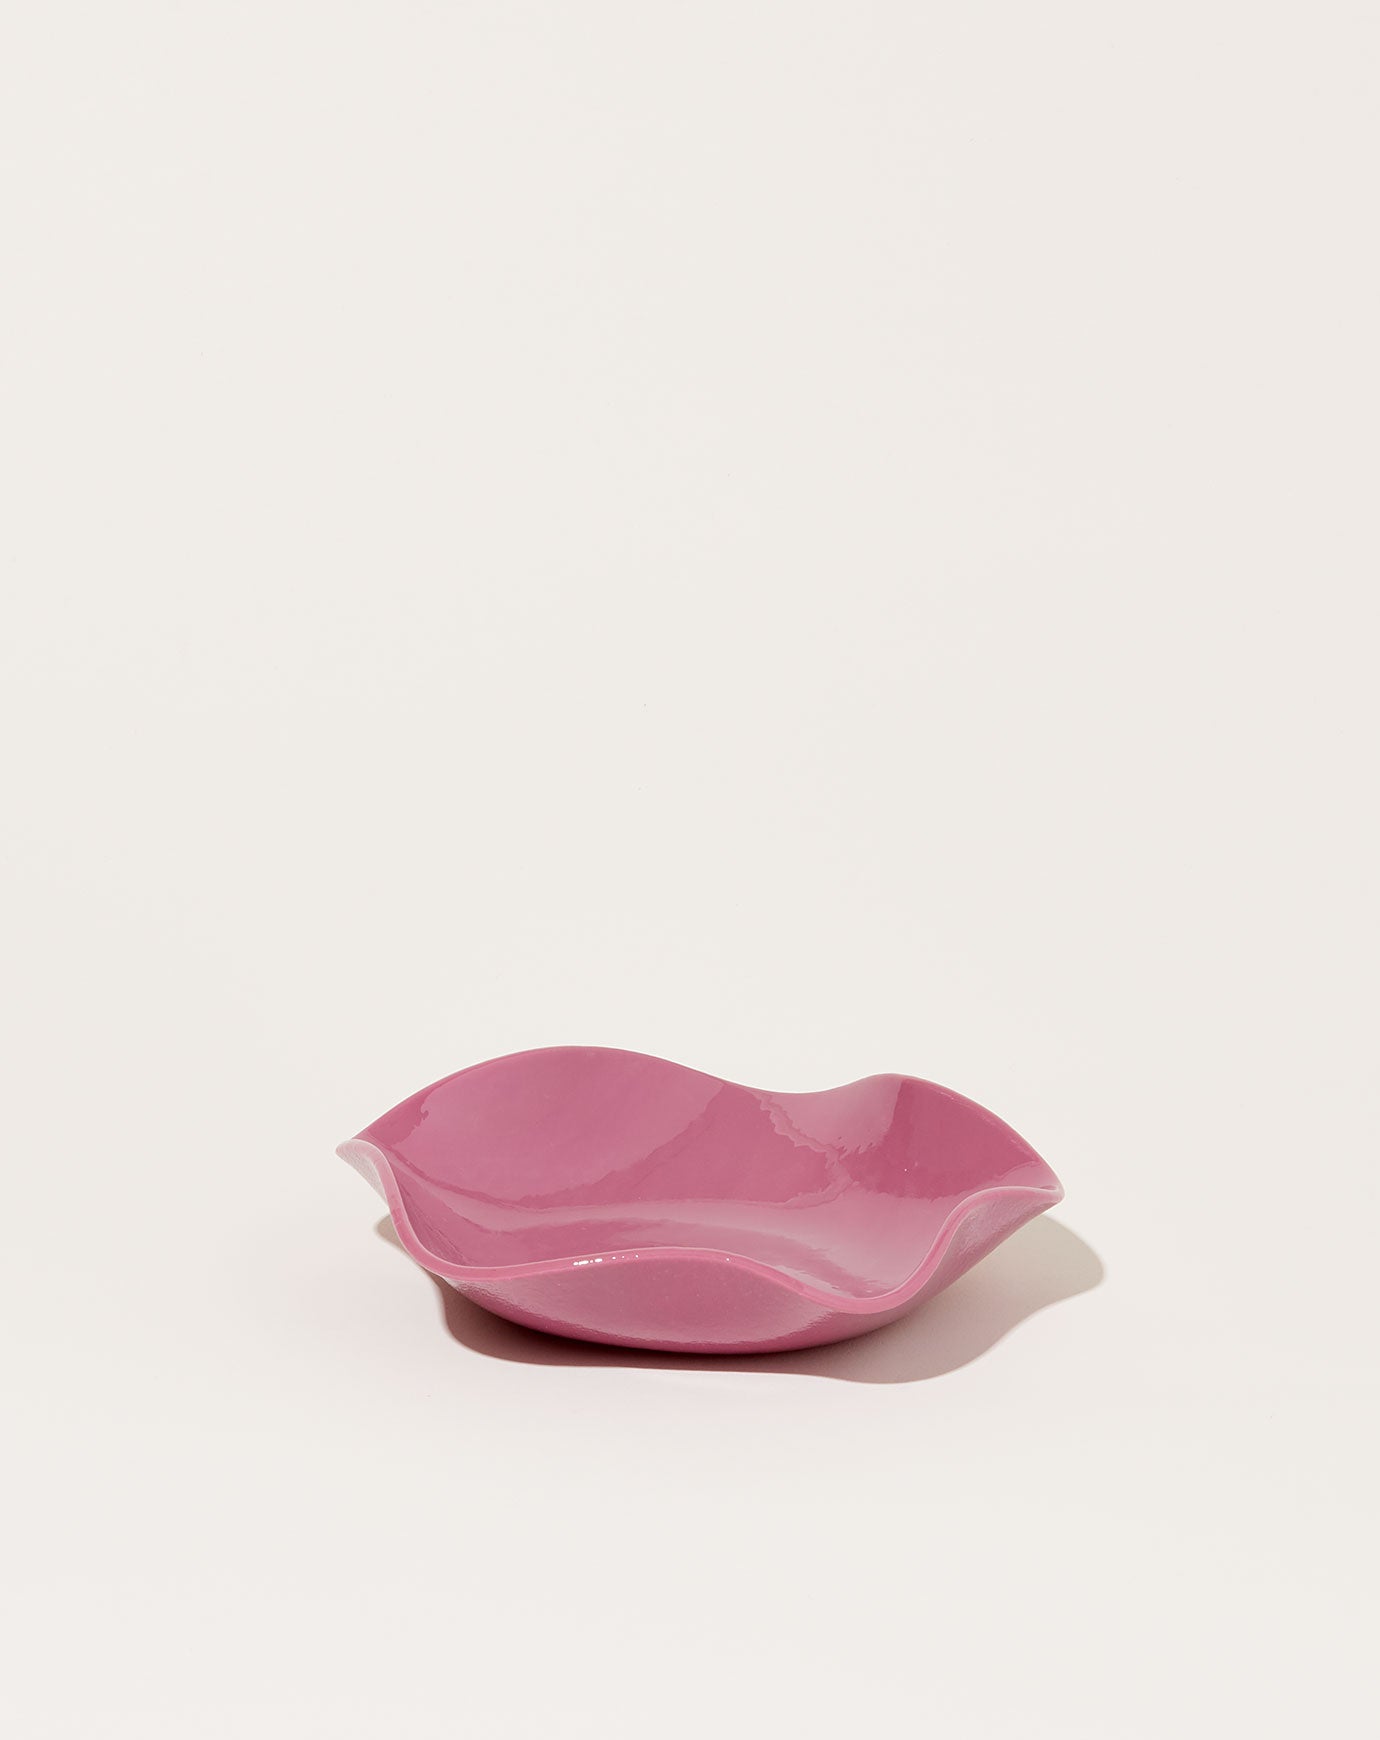 Sophie Lou Jacobsen Small Petal Plate in Rose (Opaque)